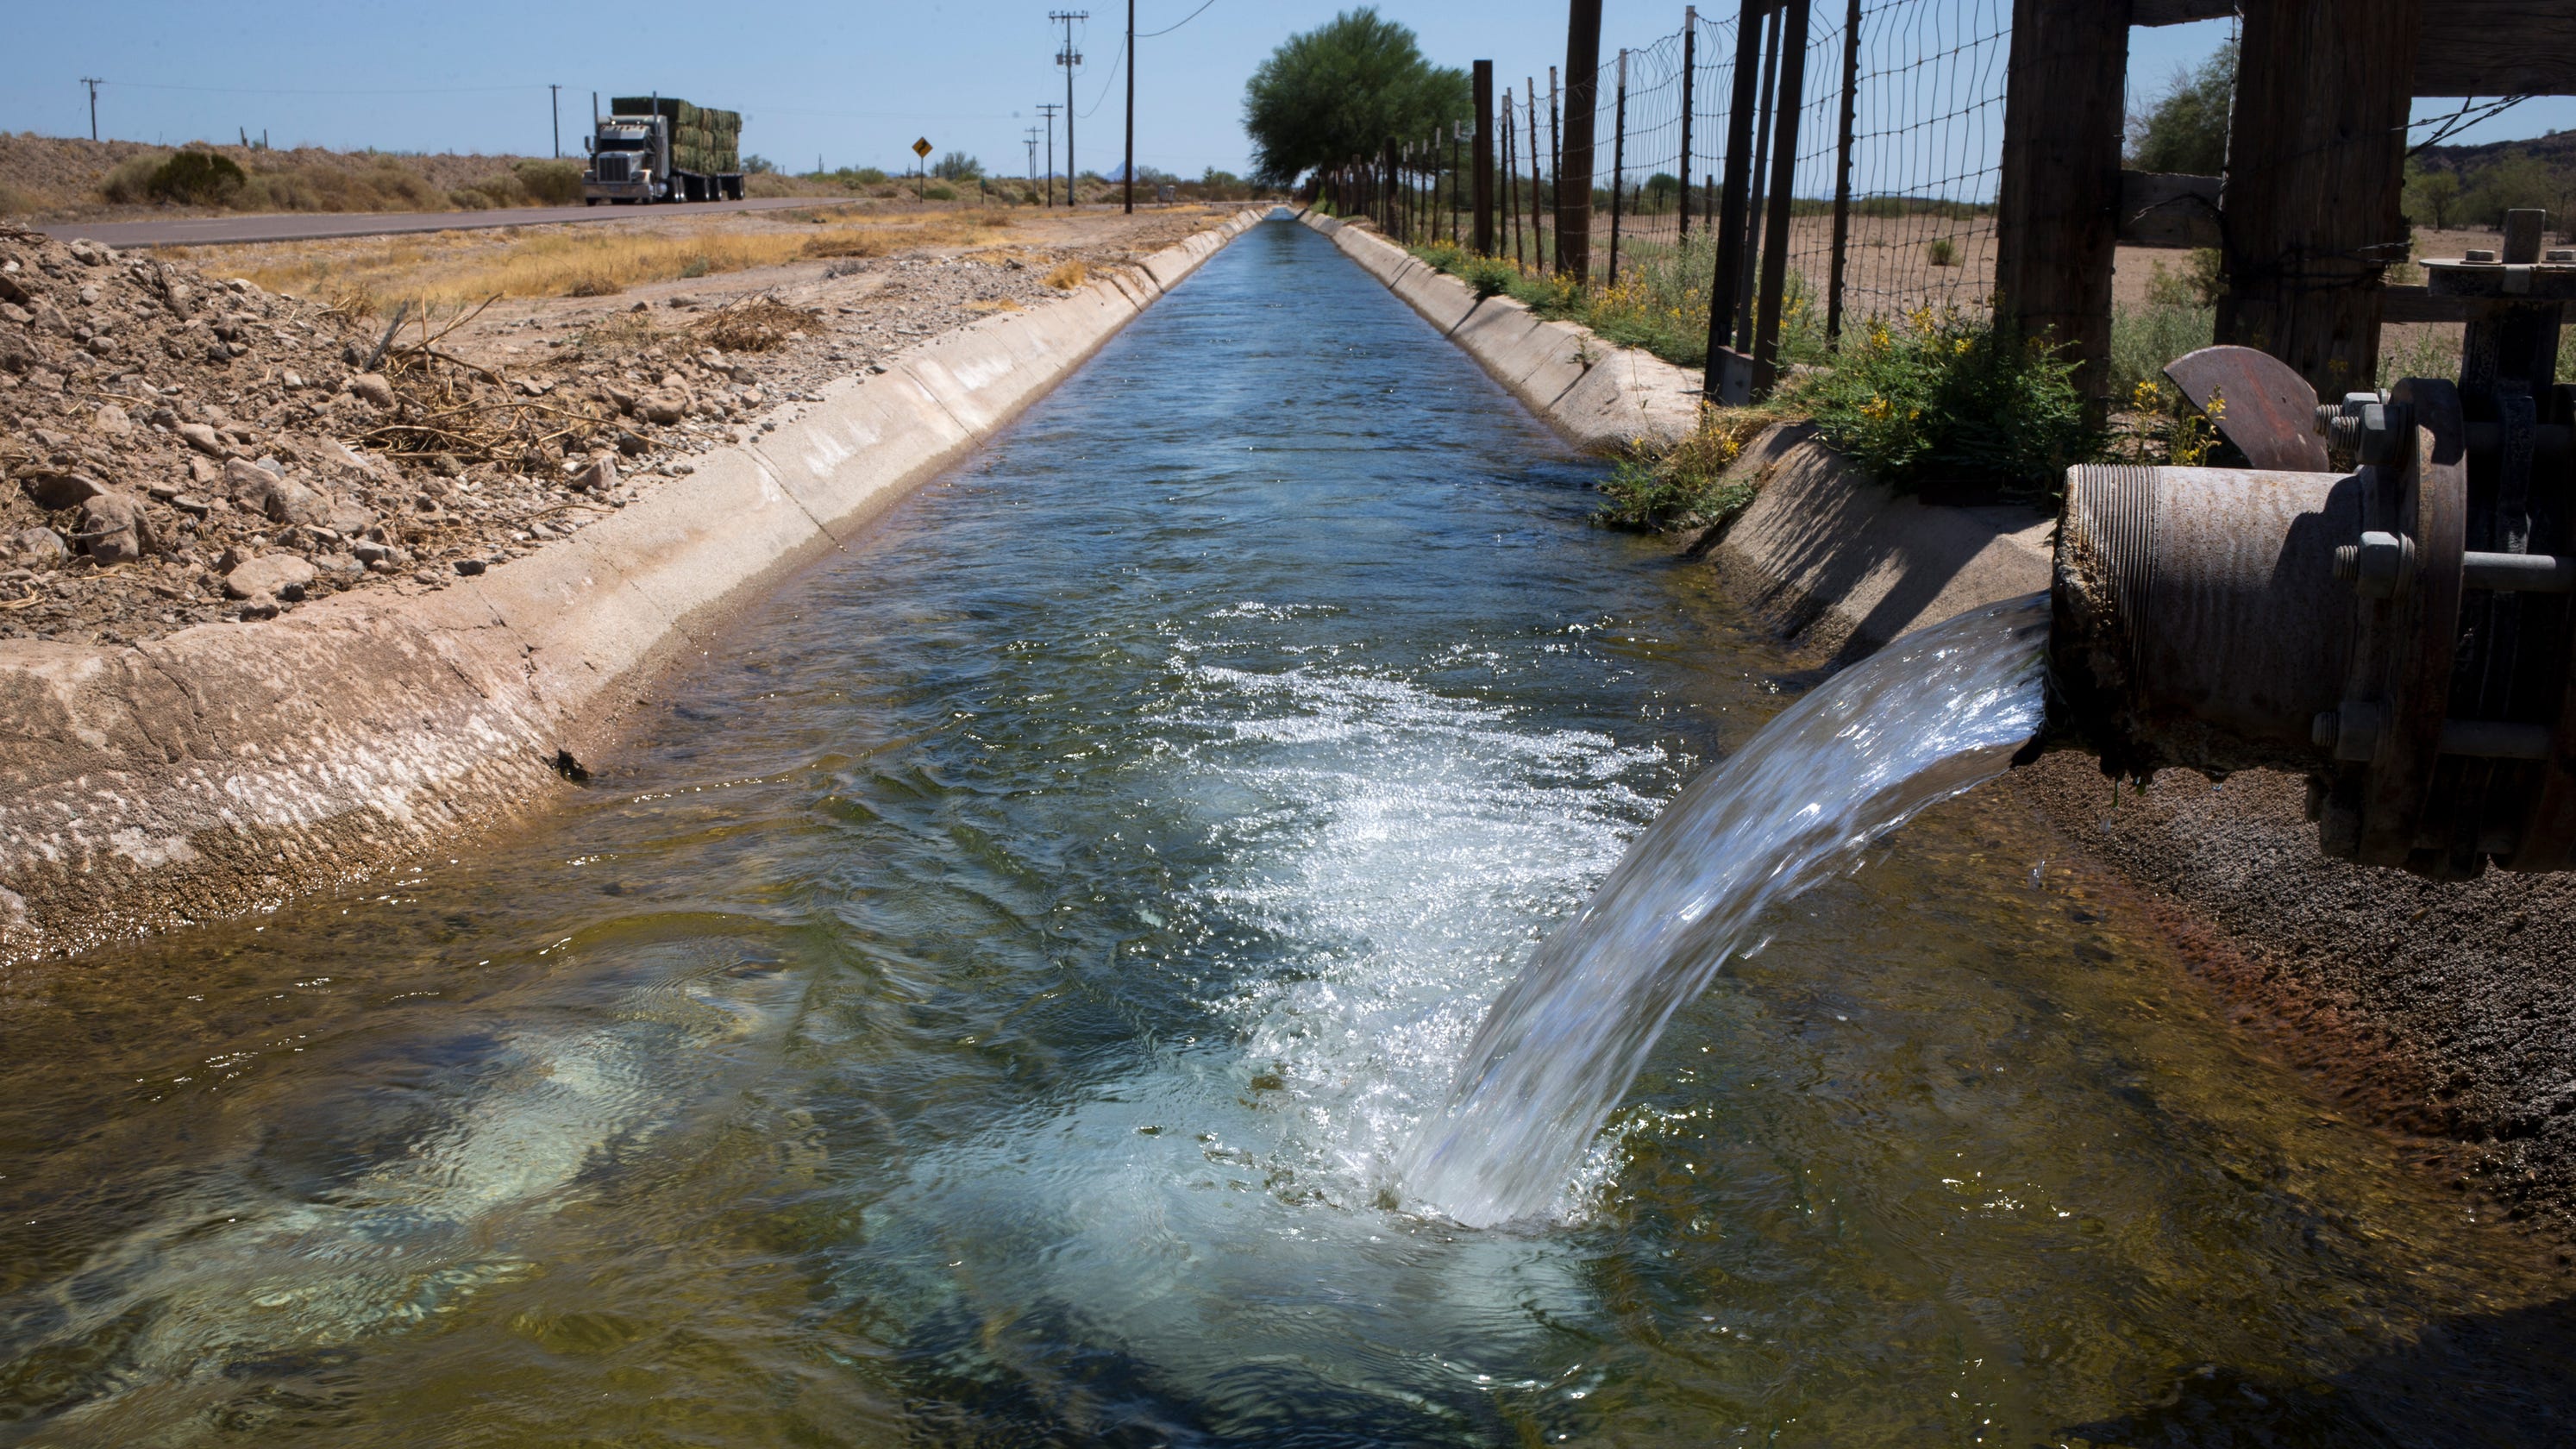 Arizona's Groundwater Management Act was groundbreaking, but it needs an update - AZCentral.com